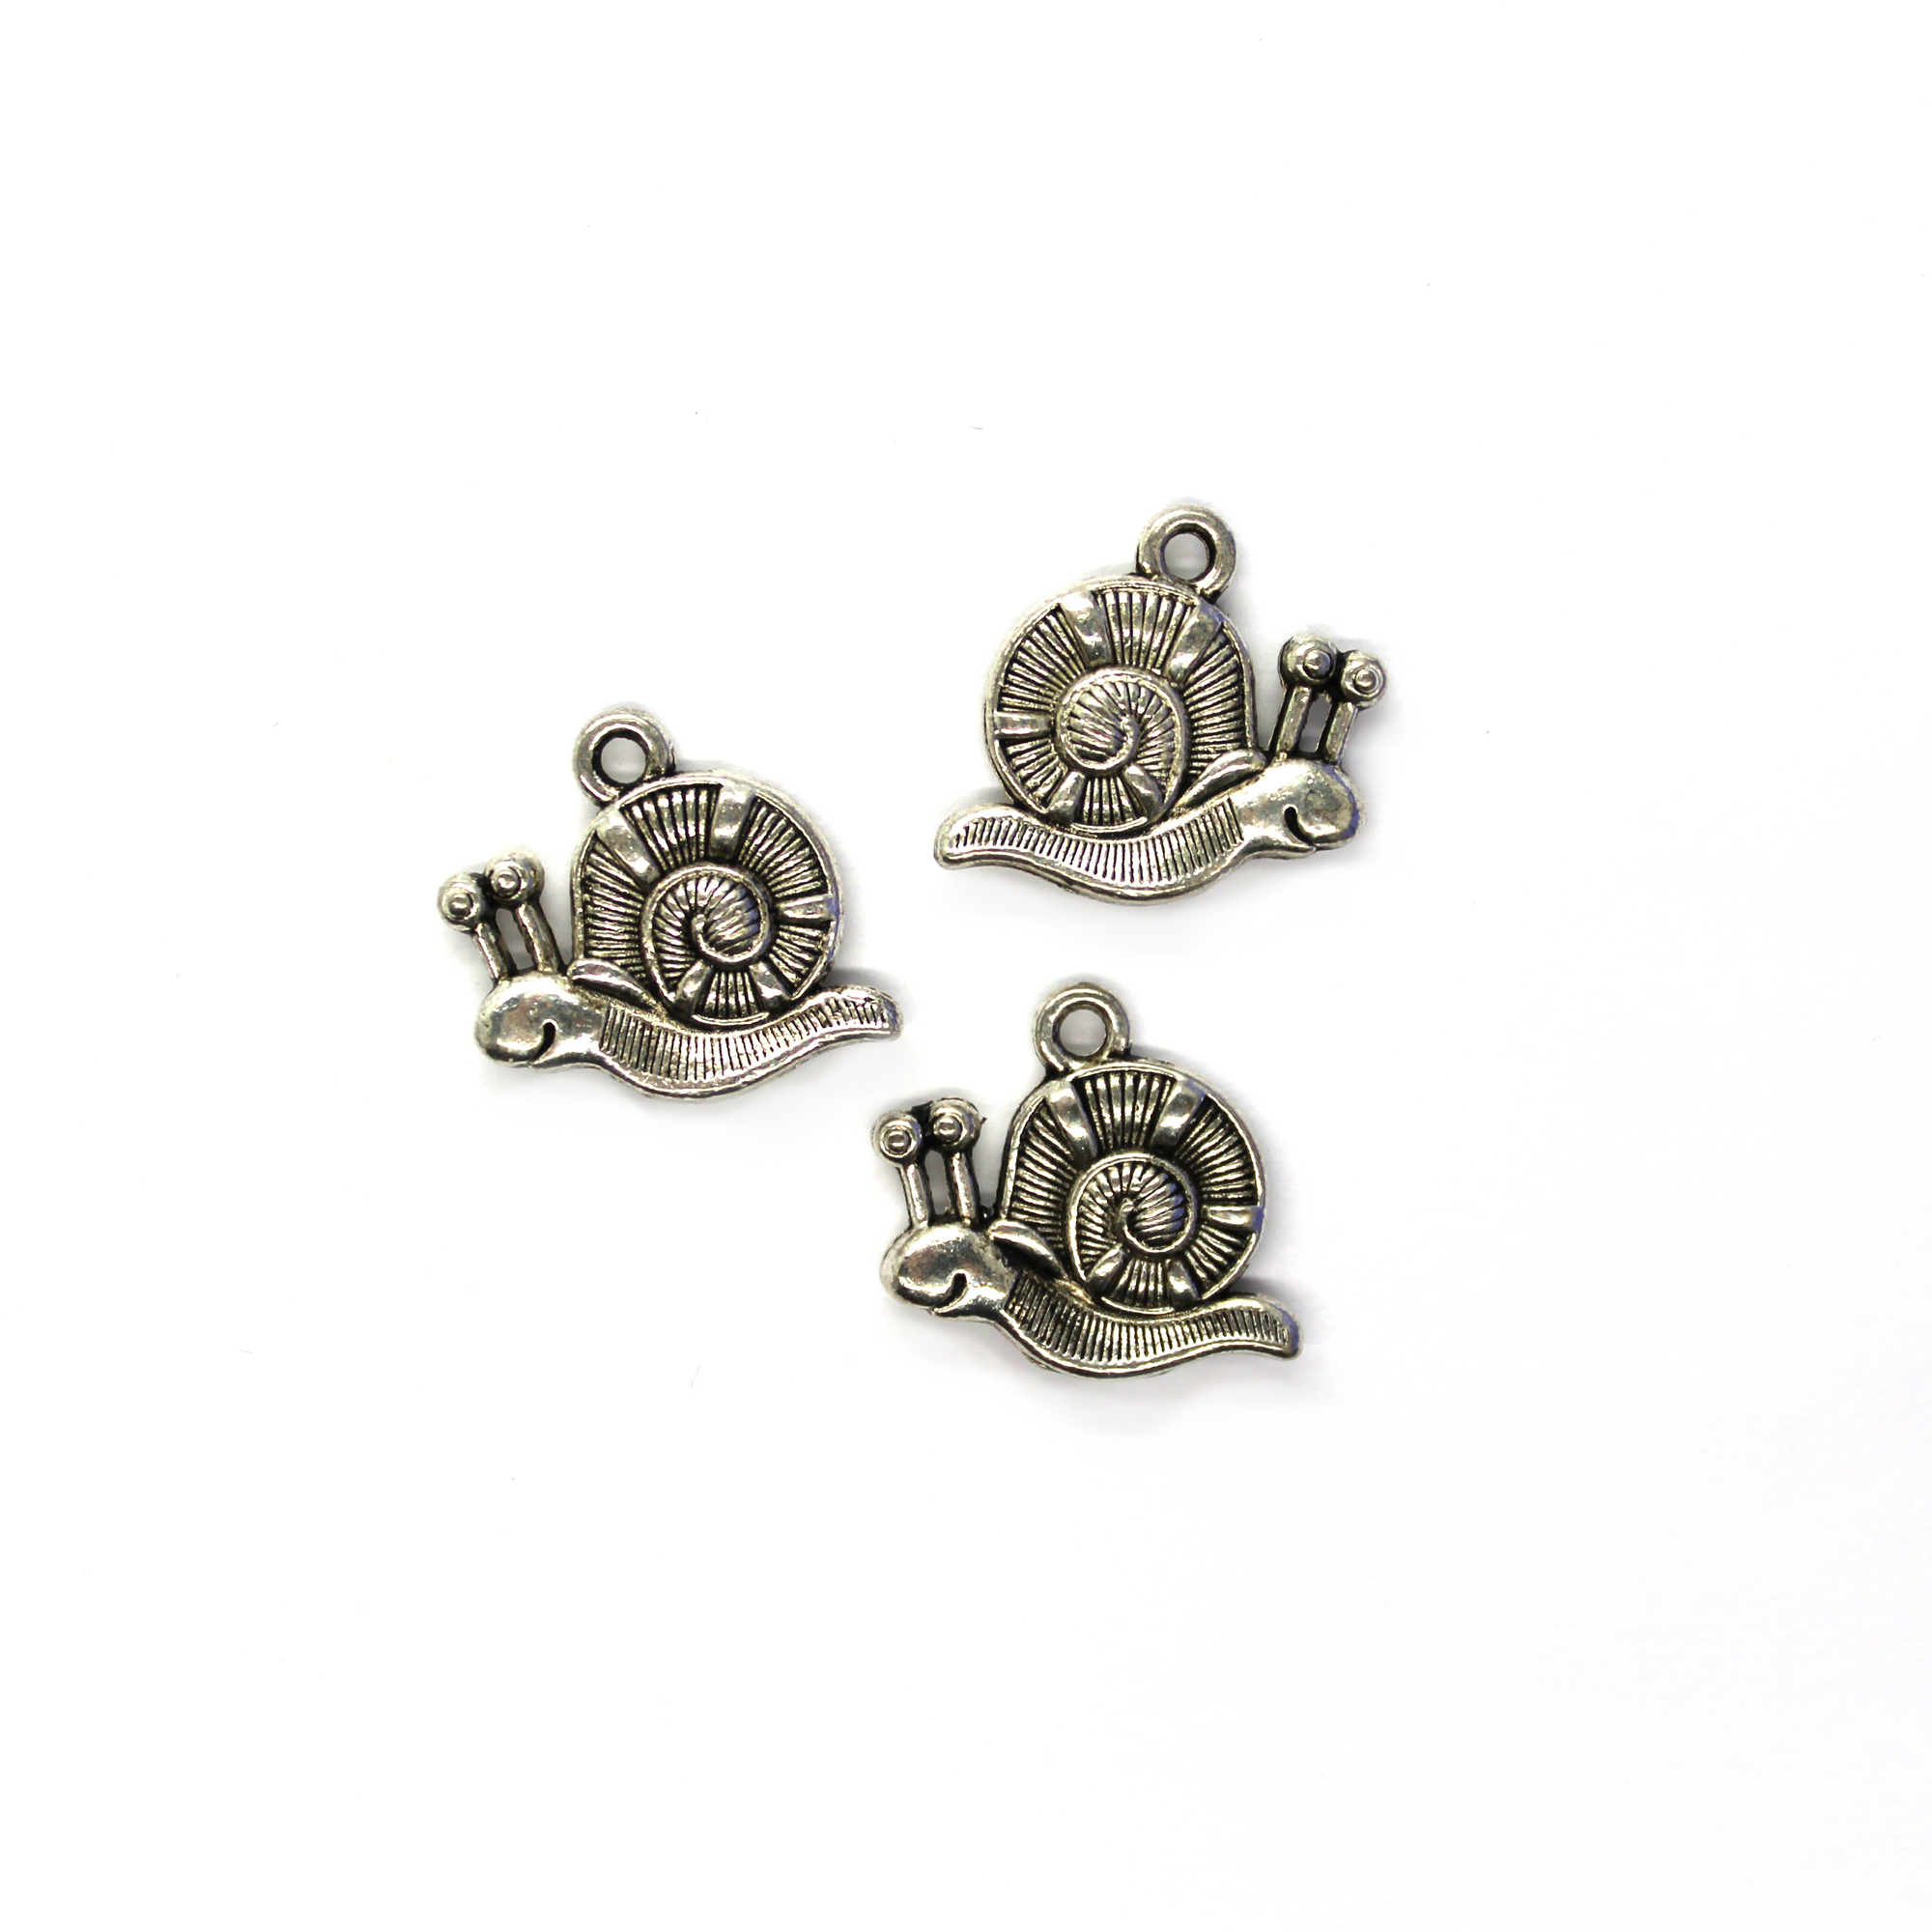 Charms, Smiley Snail, Silver, Alloy, 16mm X 17mm, Sold Per pkg of 6